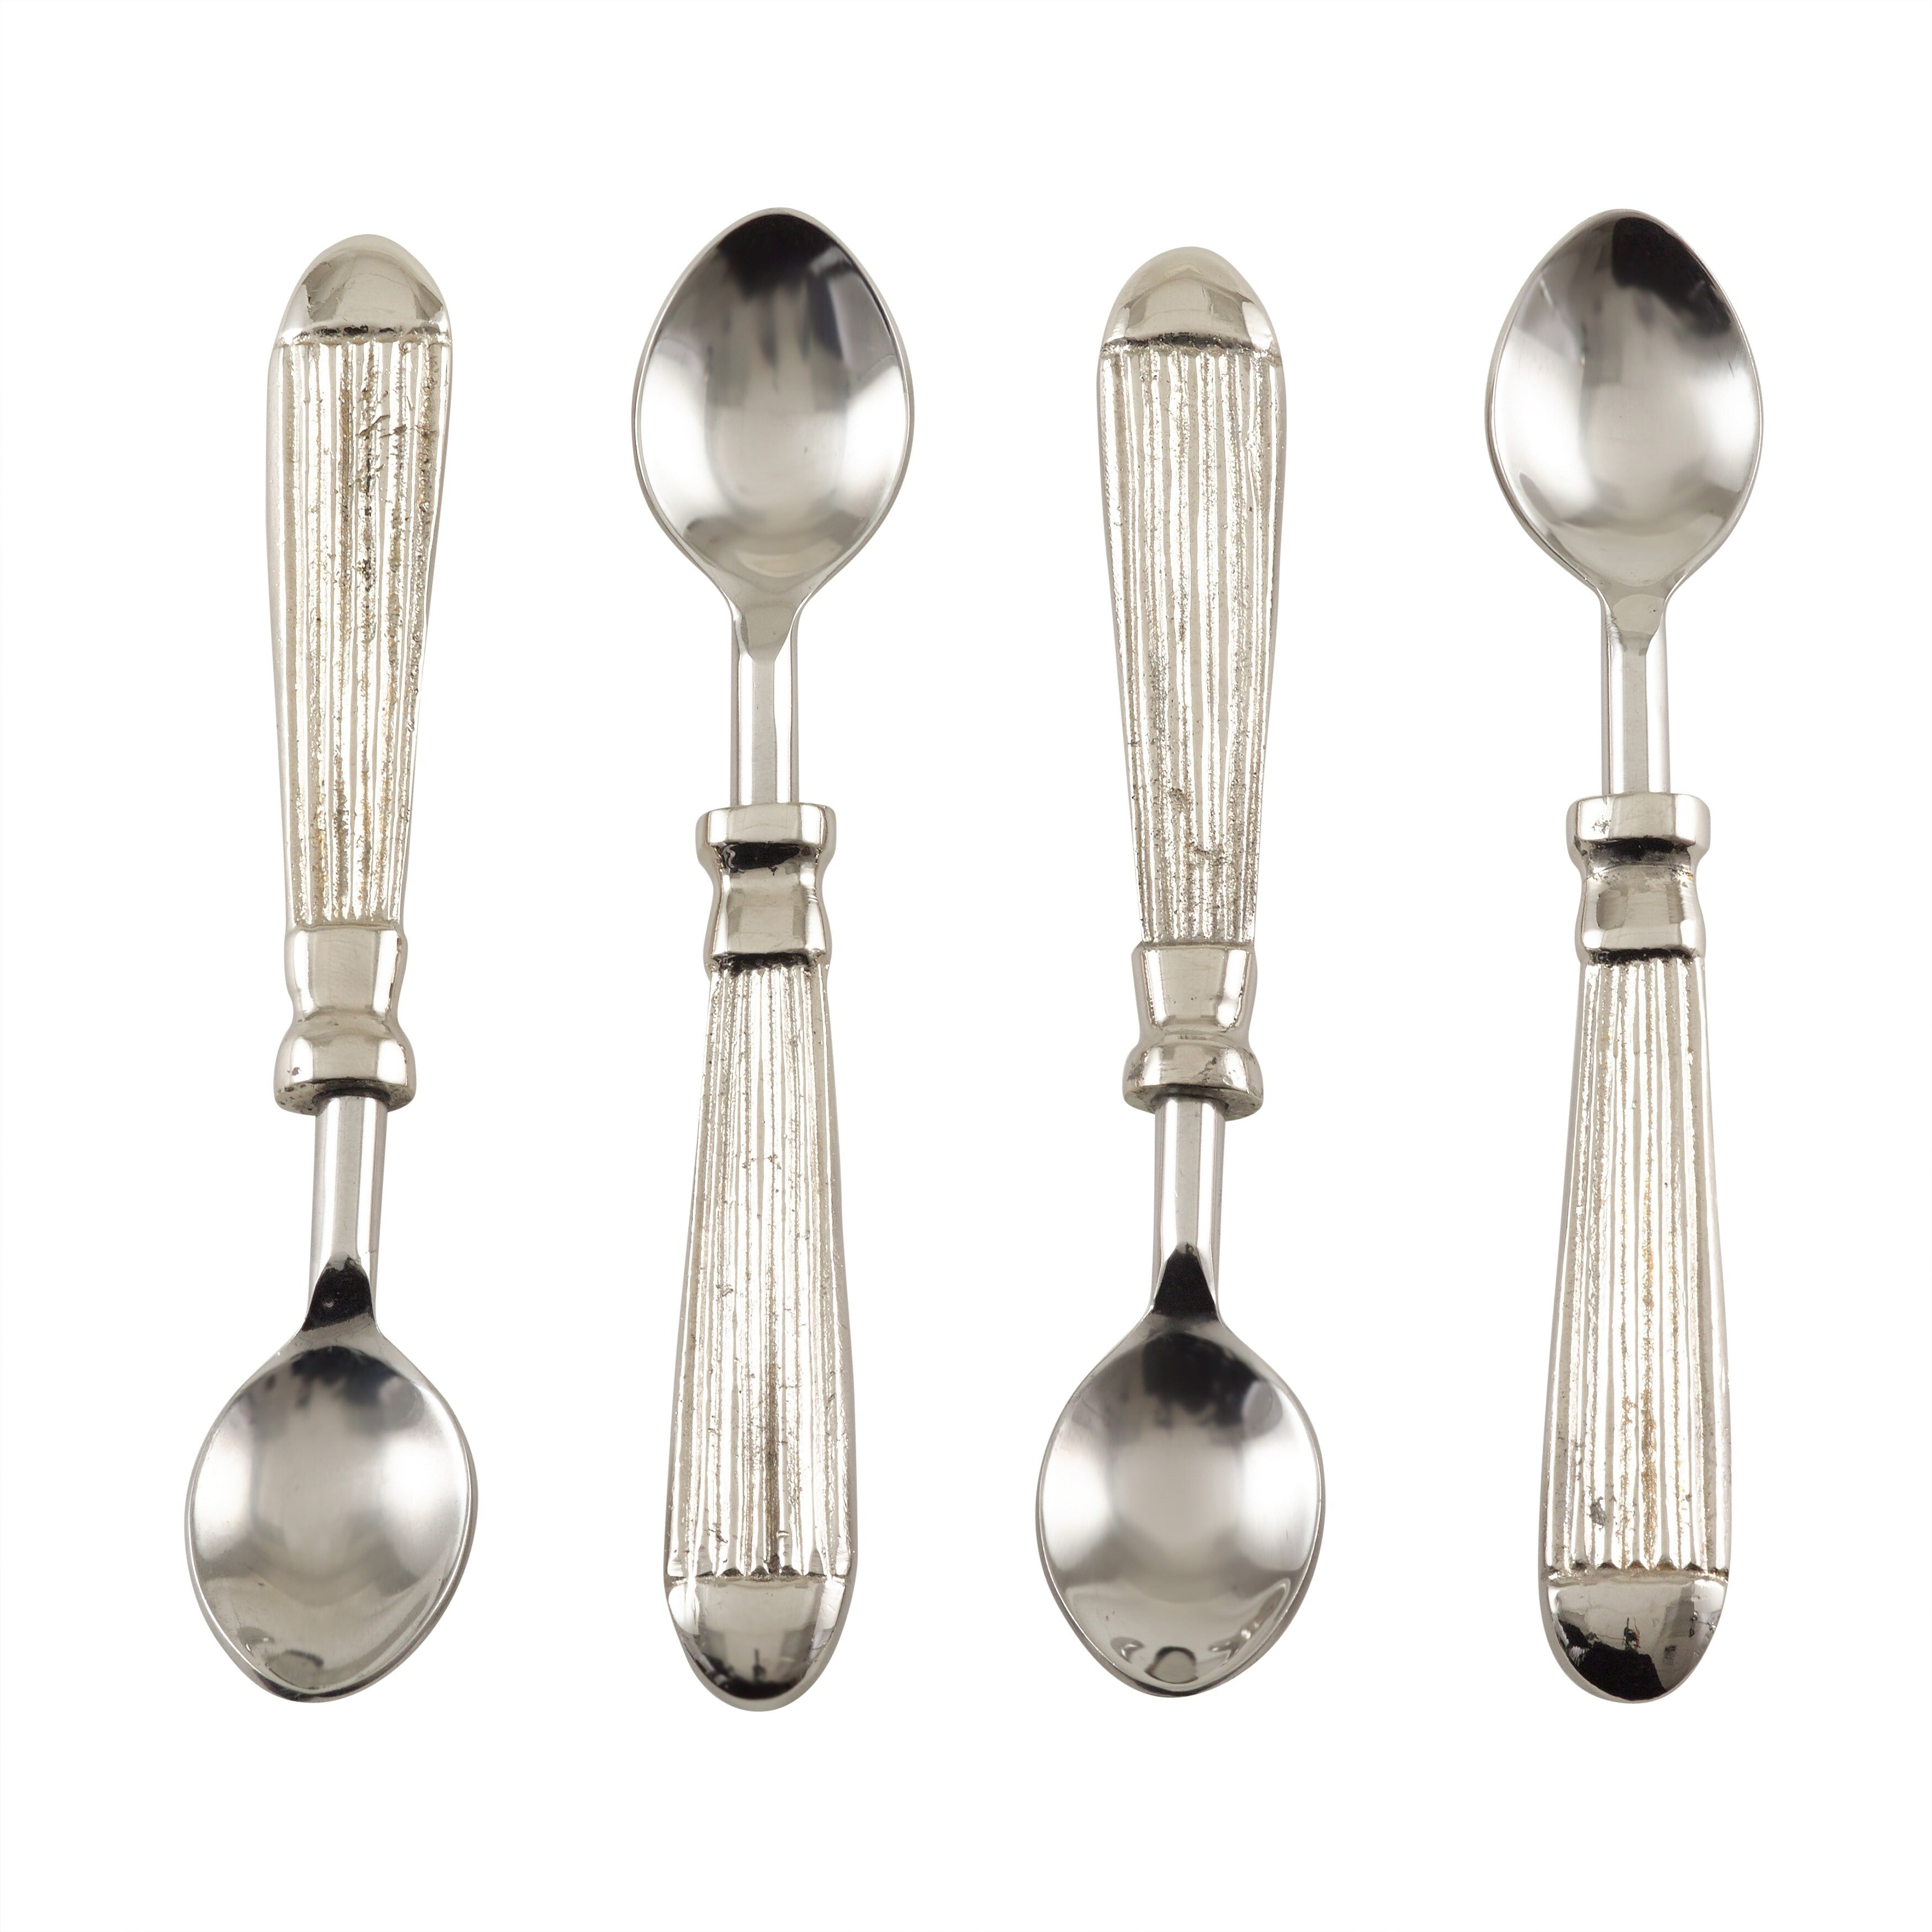 Set of 4 Alessi /"Dry/" Stainless Steel Mocha Espresso Coffee Spoon